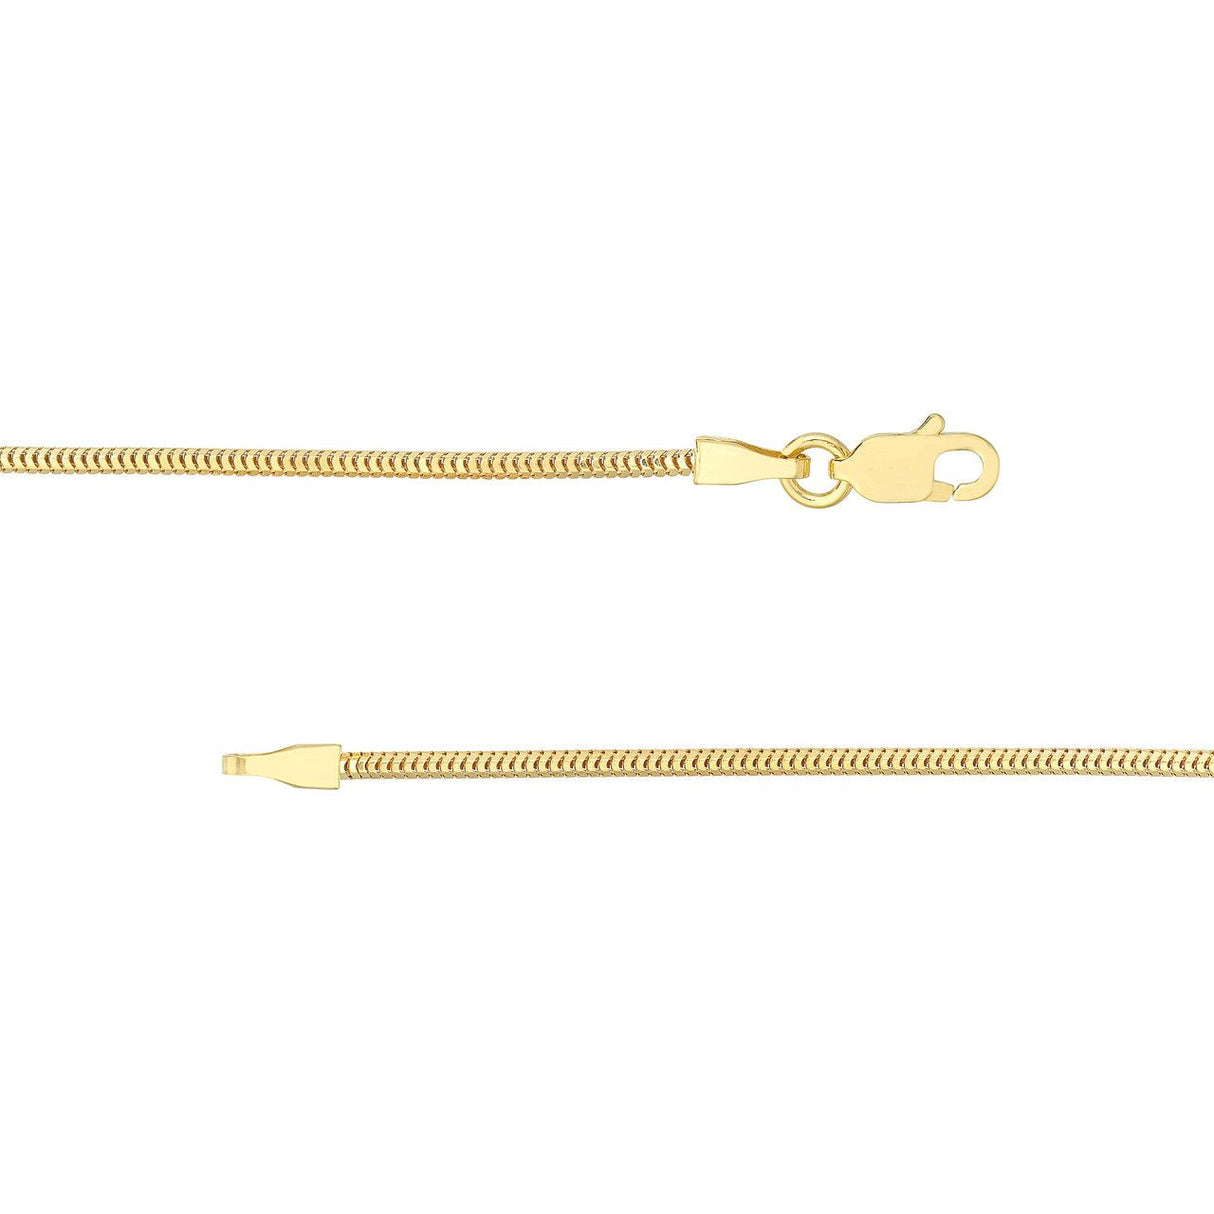 10K Gold Chain, 20 inches, 1.4mm Snake Chain with Lobster Lock, Gold Chain Necklace, - Diamond Origin